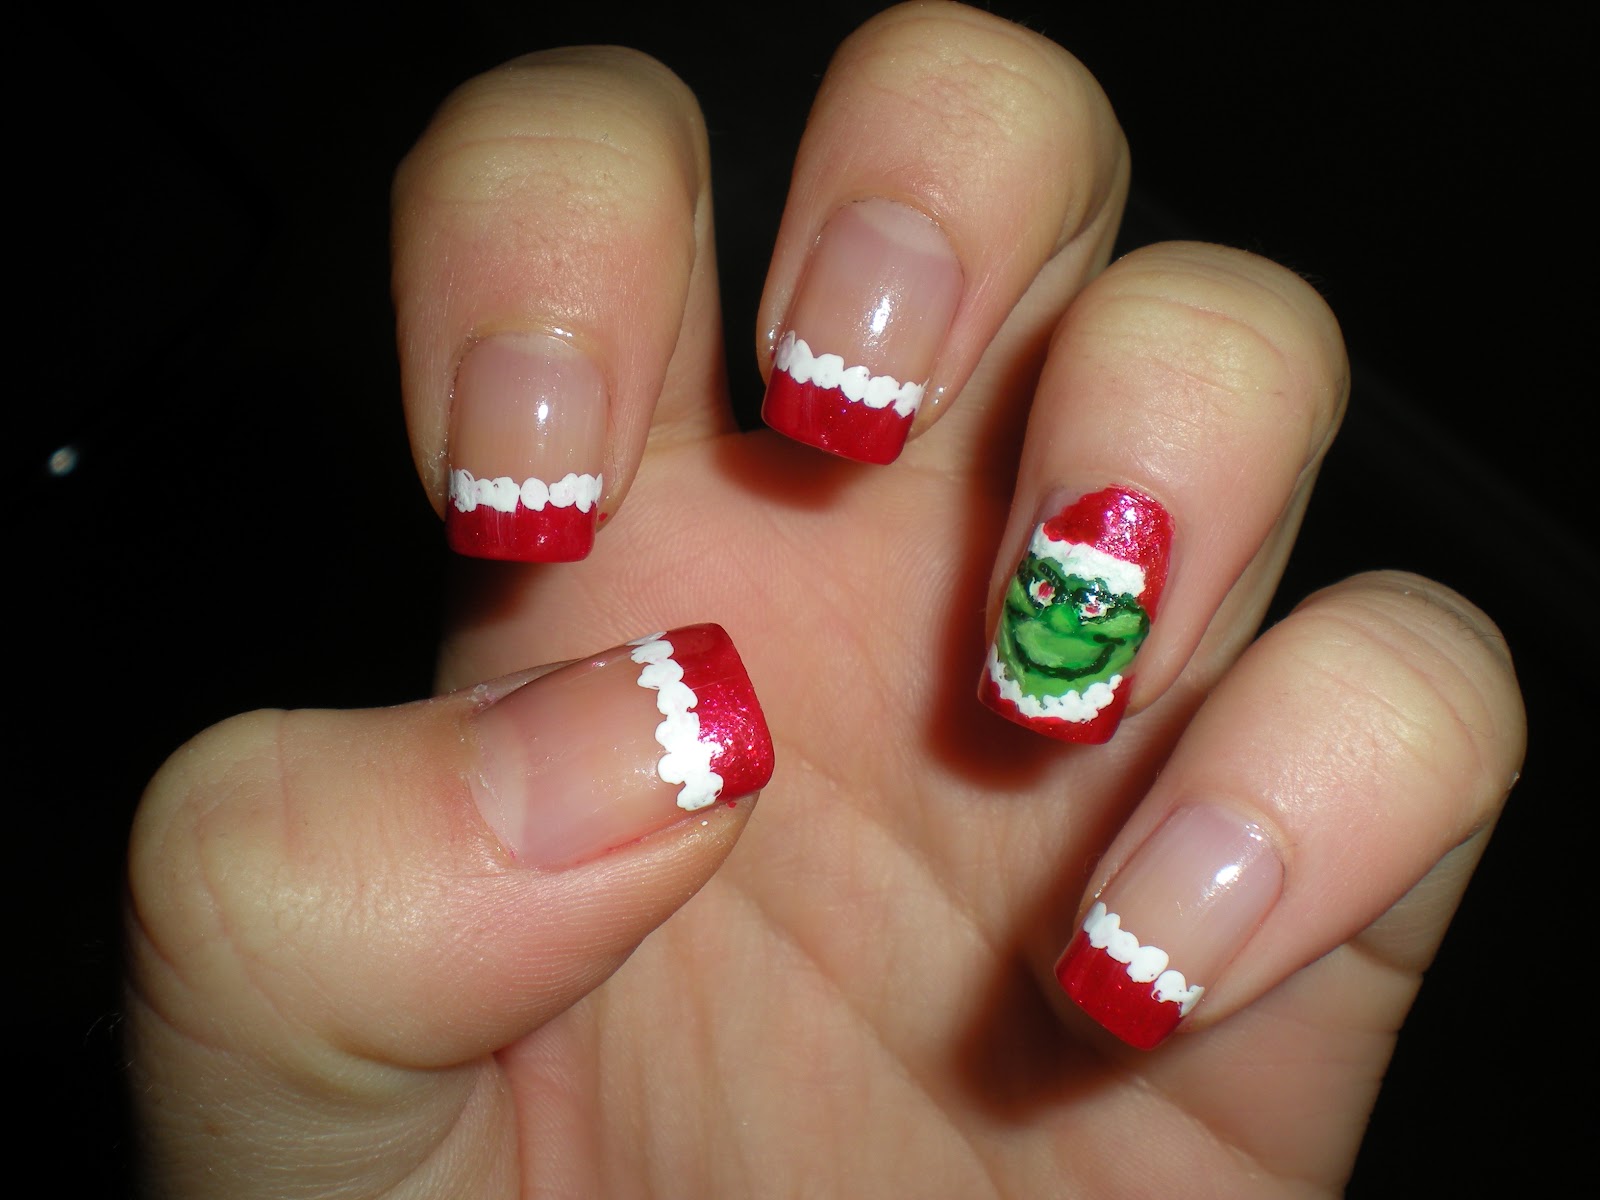 3. Festive "The Grinch" Nail Designs for the Holidays - wide 8